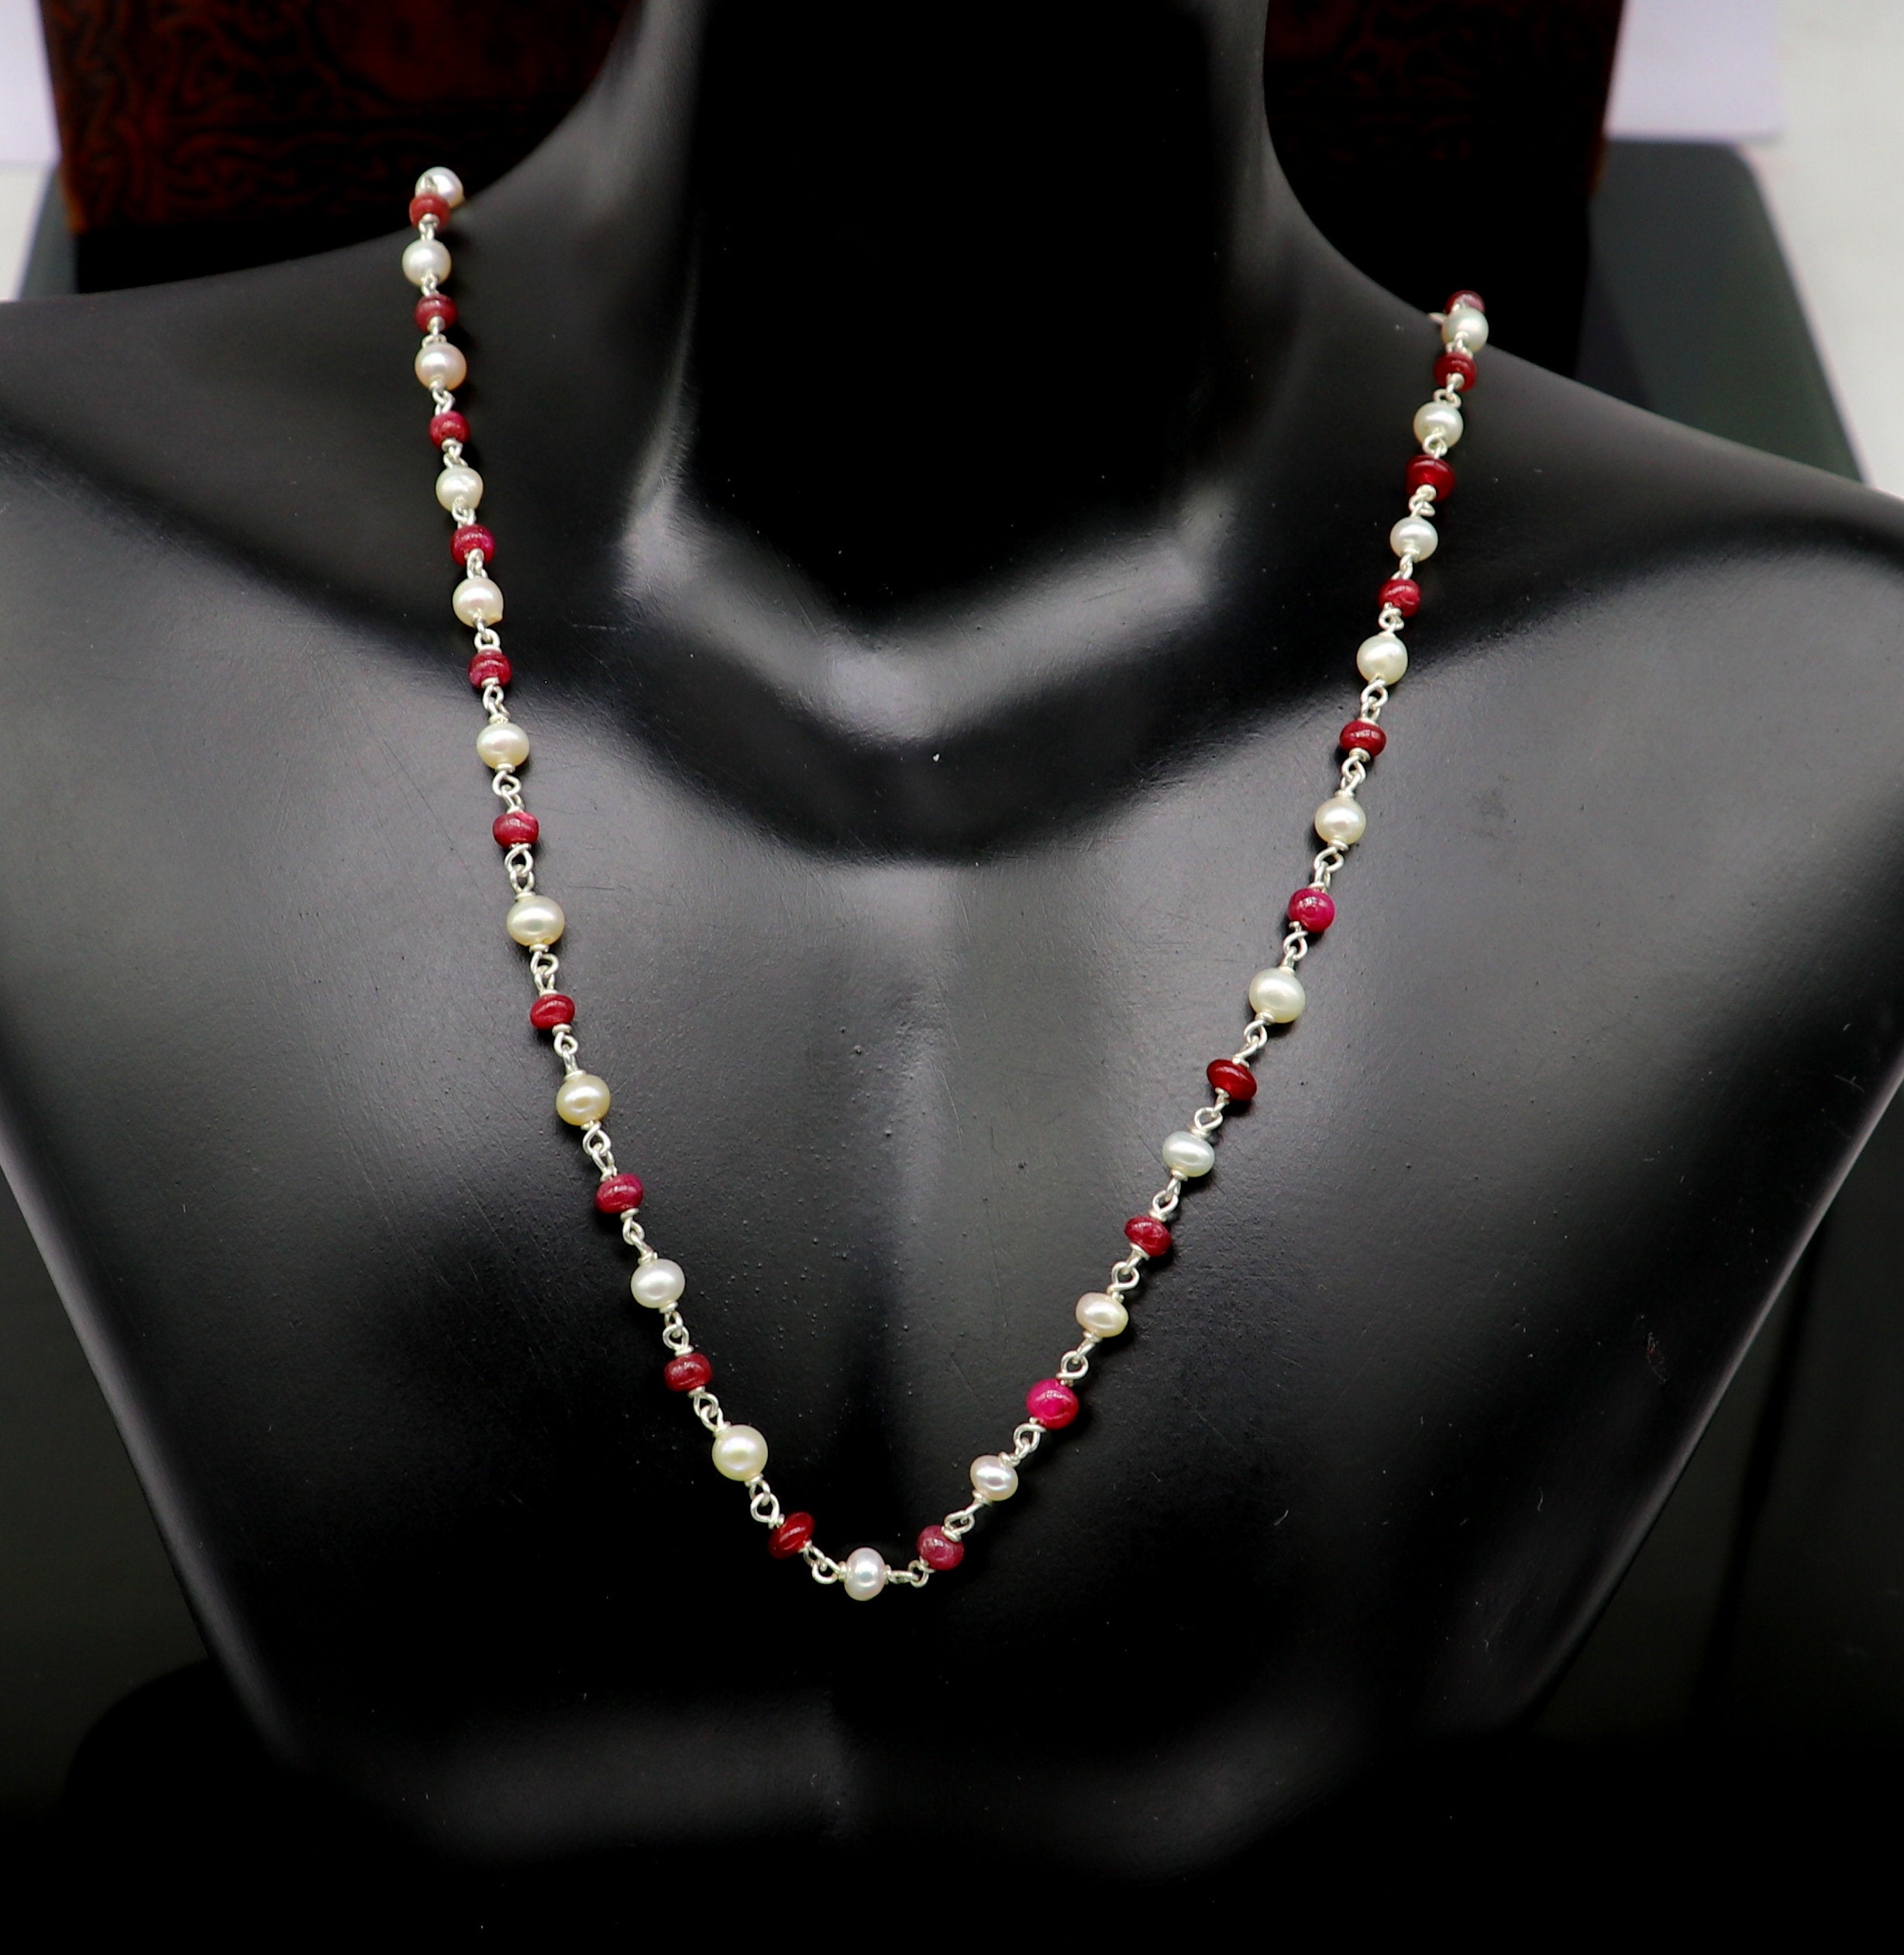 Handcrafted Red Green Multilayered Beads Necklace